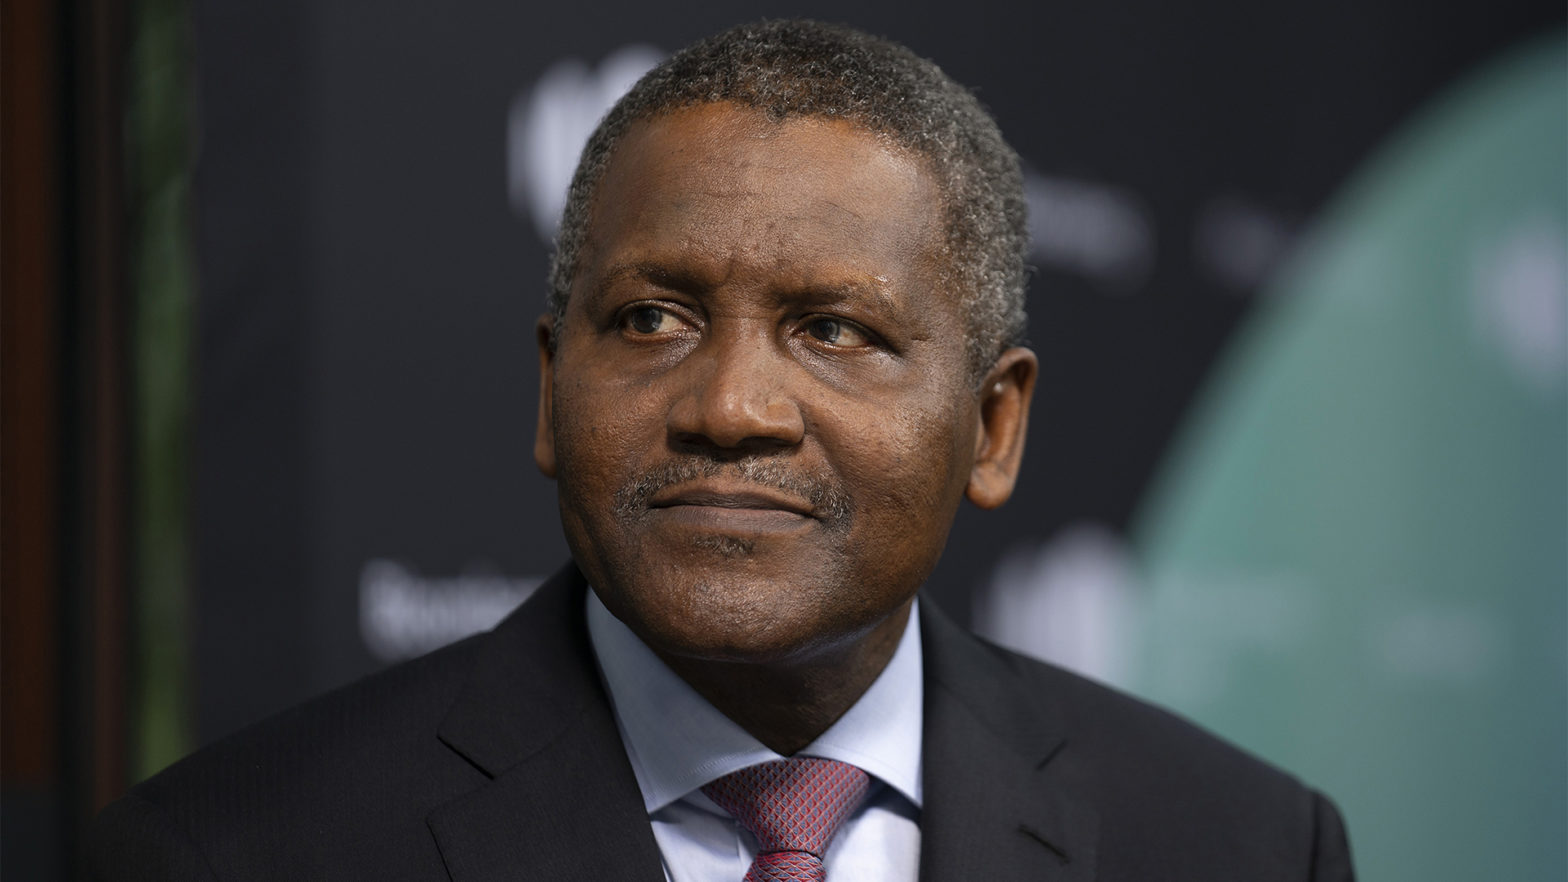 Who Is the Richest Black Man In the World? AfroTech